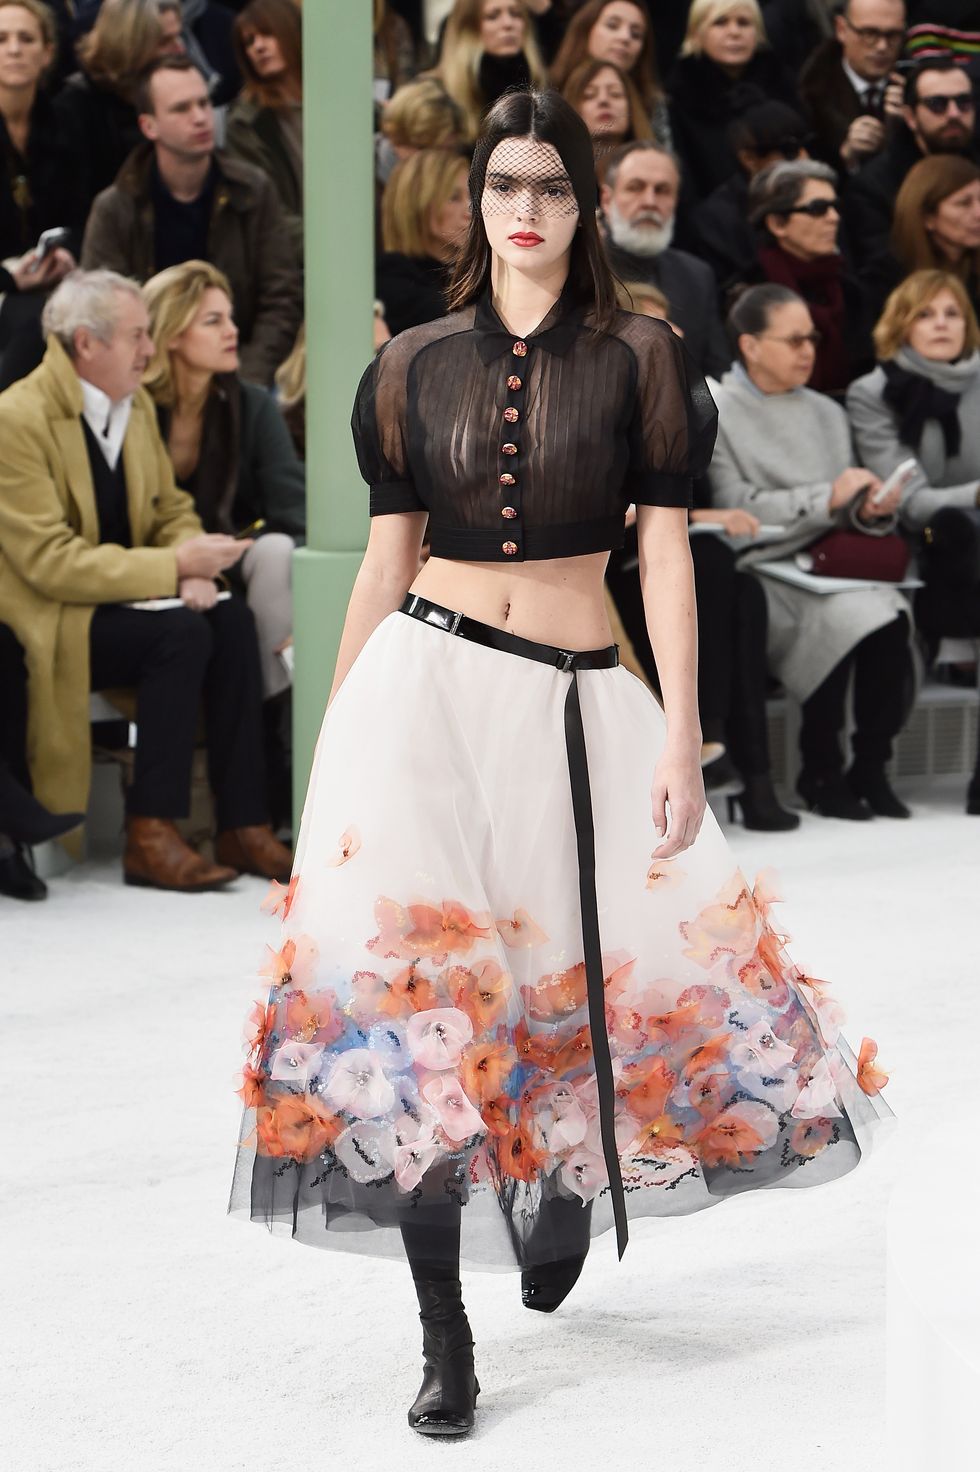 Kendall Jenner on the catwalk for Chanel Spring/Summer 2015 haute couture